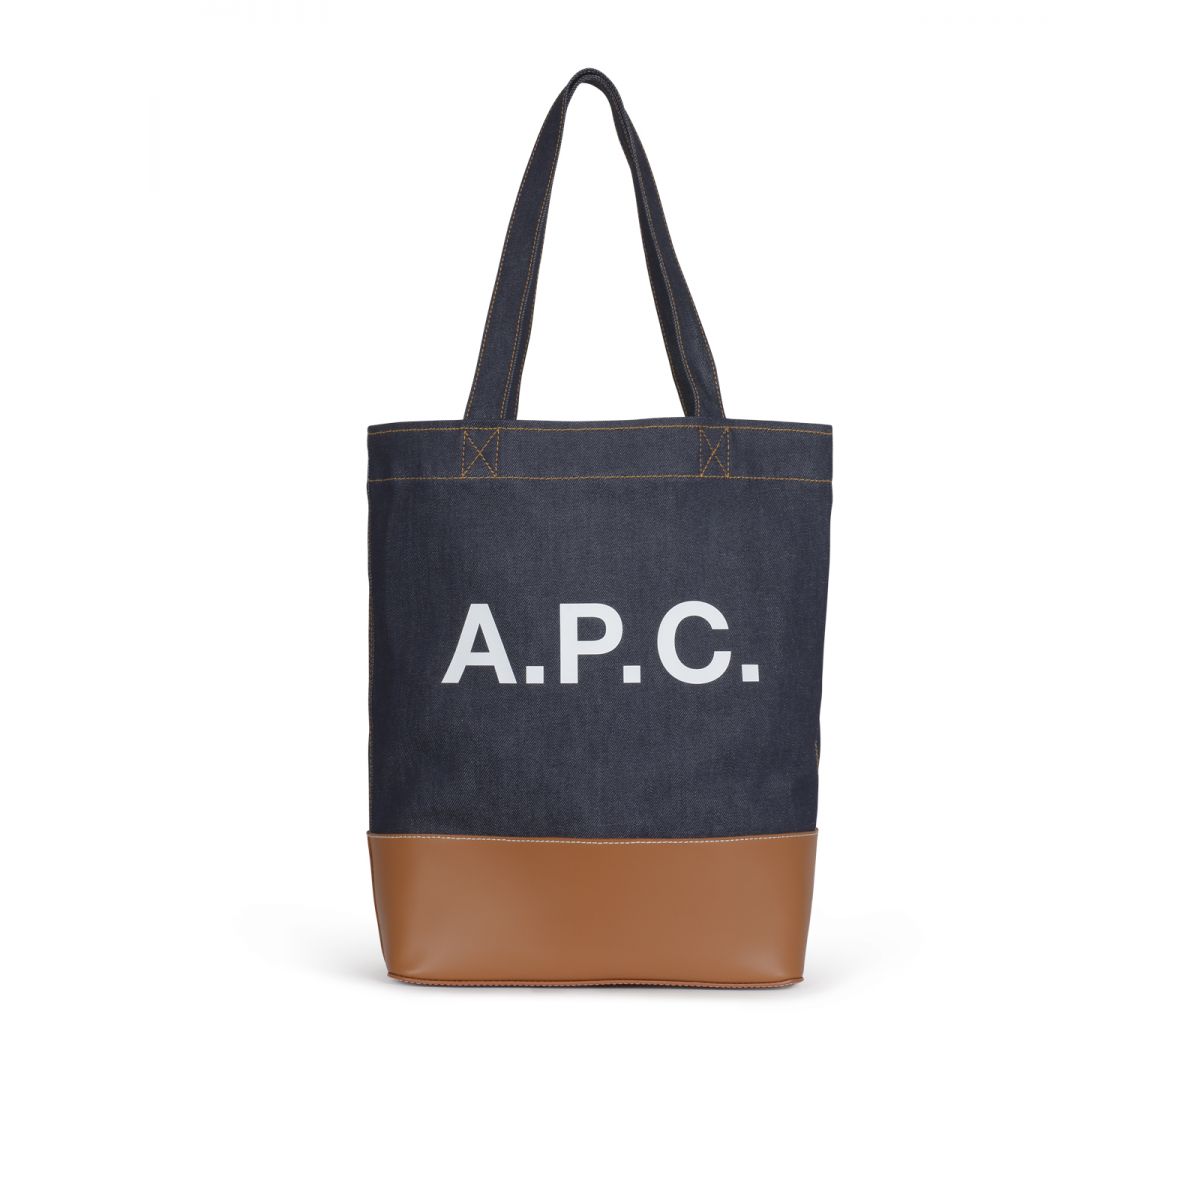 A.P.C. - Axel panelled tote bag